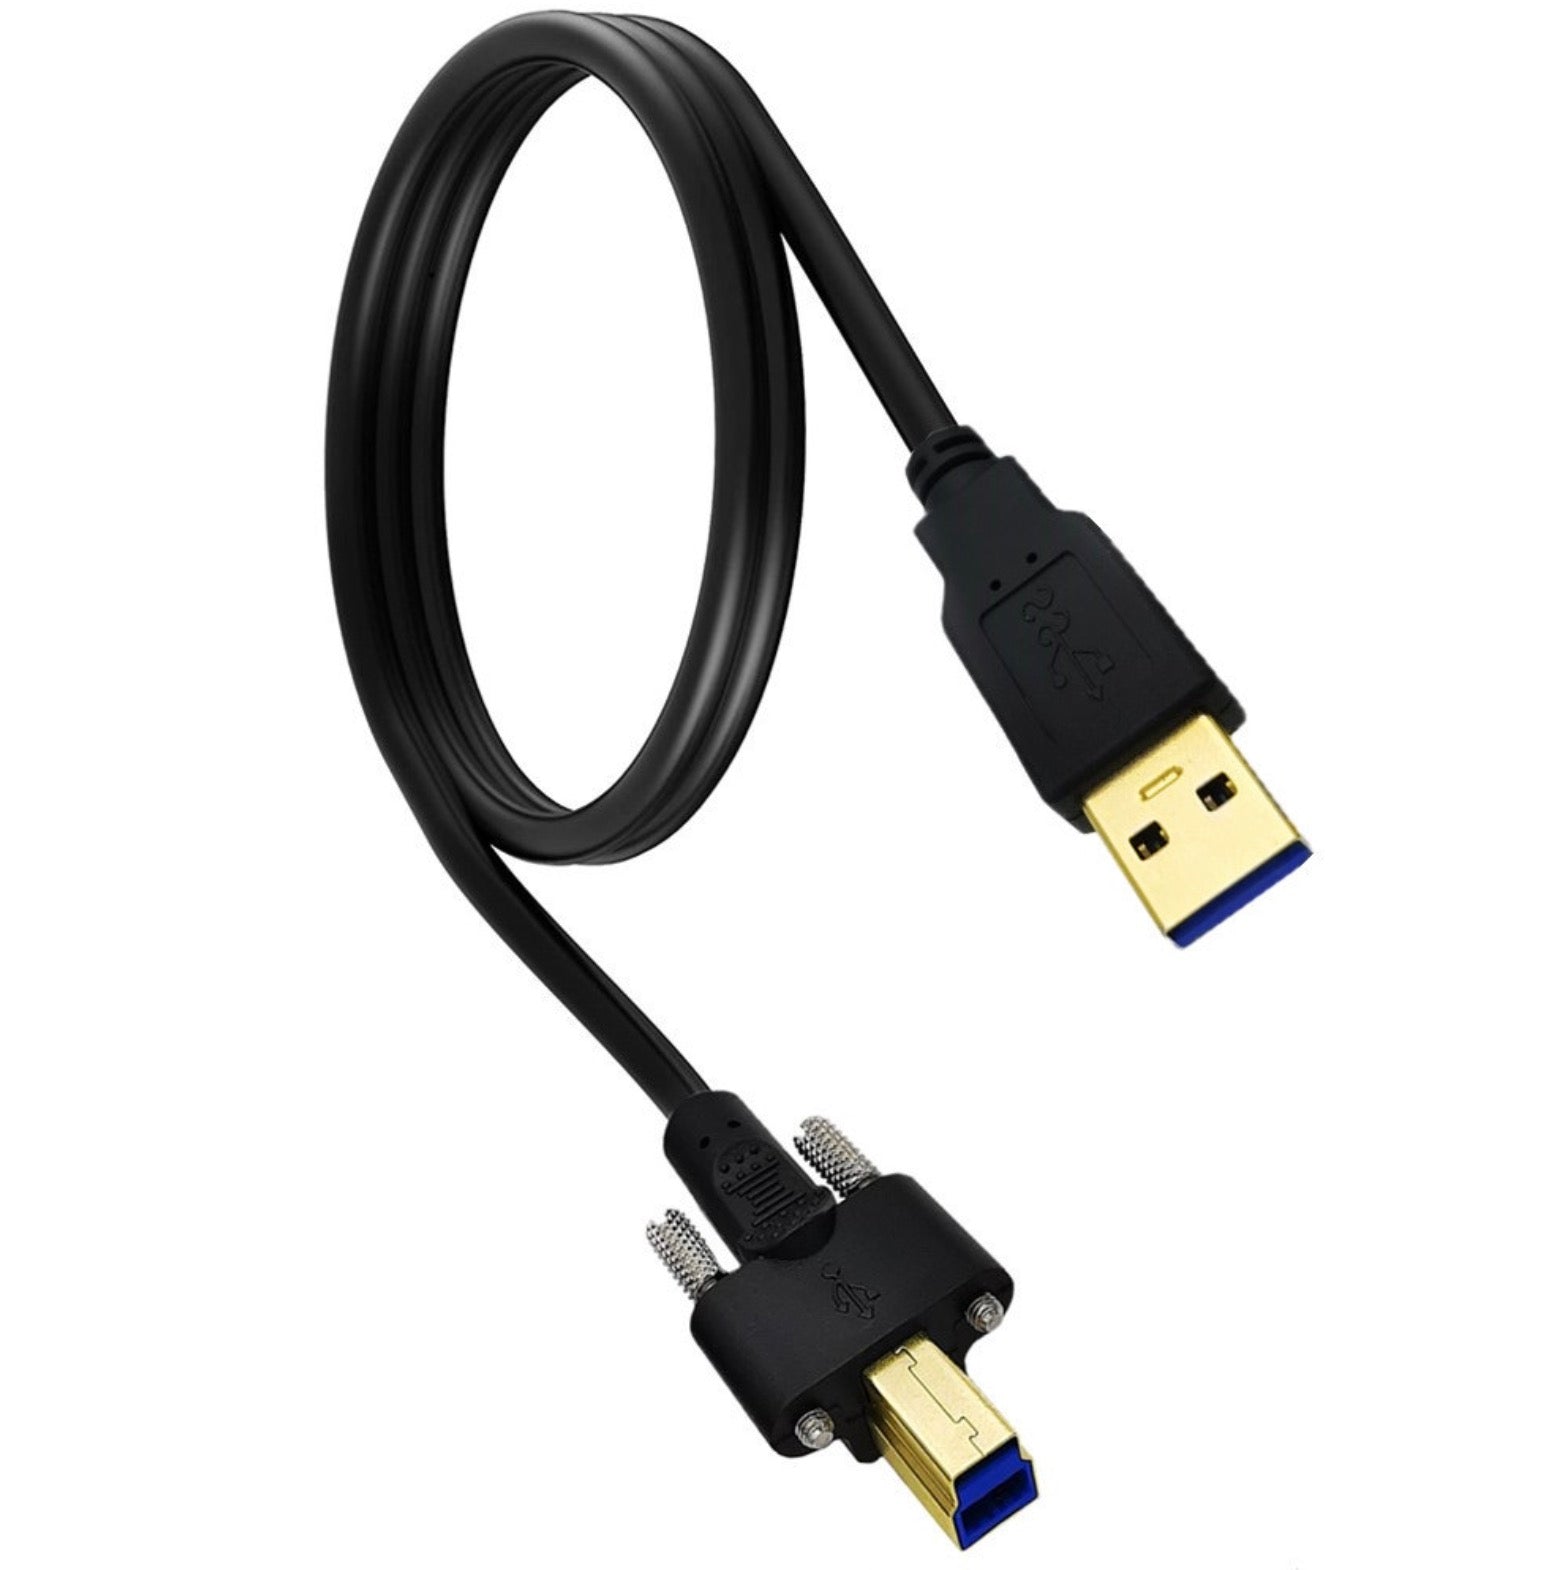 USB 3.0 A Male to Type B Male Cable (Locking Screw) For Printers and Scanners